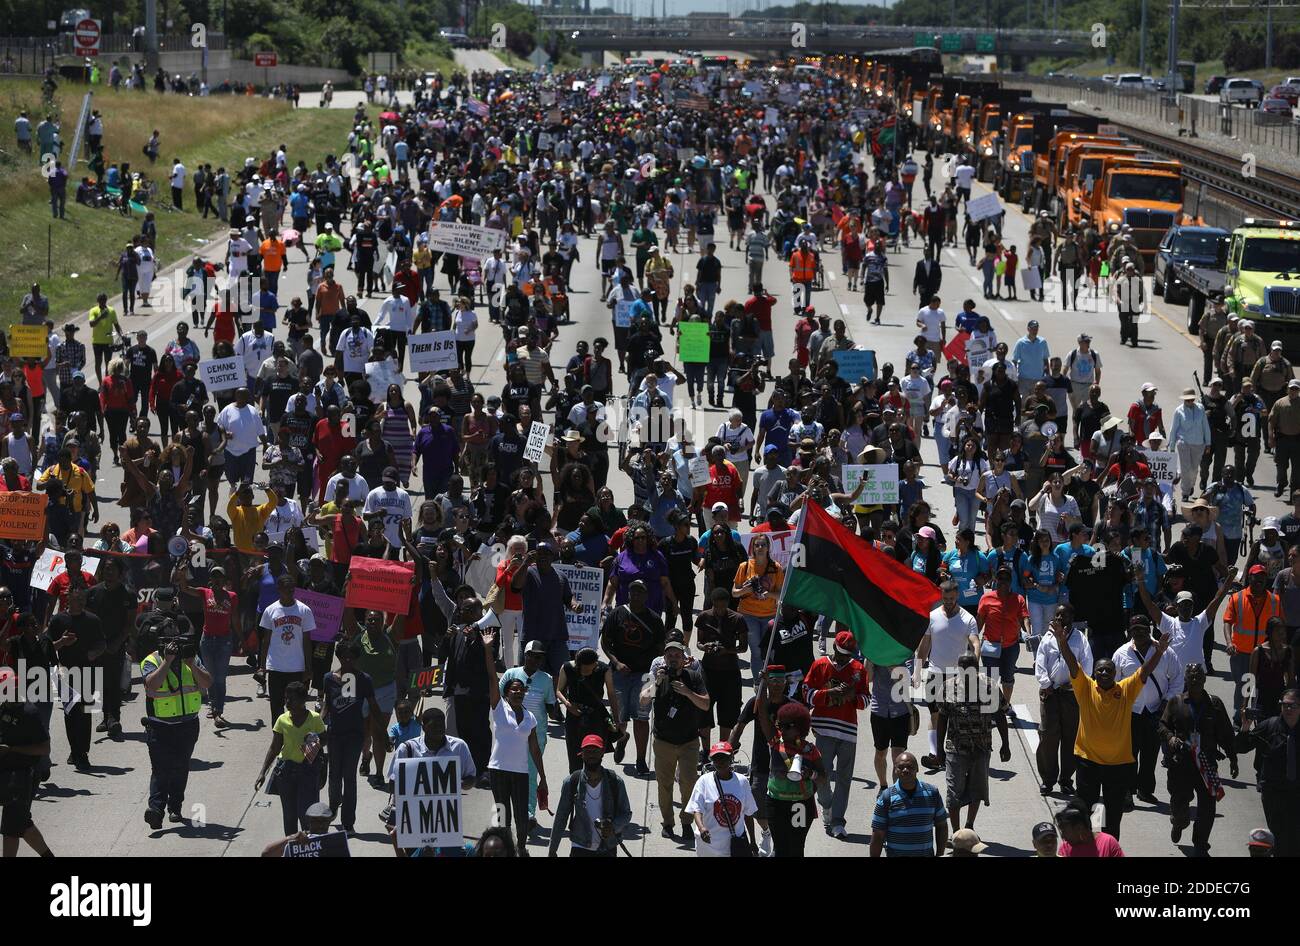 NO FILM, NO VIDEO, NO TV, NO DOCUMENTARY - Thousands of protesters walk north on the Dan Ryan Expressway in Chicago, IL, USA after blocking the transportation artery in an anti-violence march on Saturday, July 7, 2018. Photo by Abel Uribe/Chicago Tribune/TNS/ABACAPRESS.COM Stock Photo